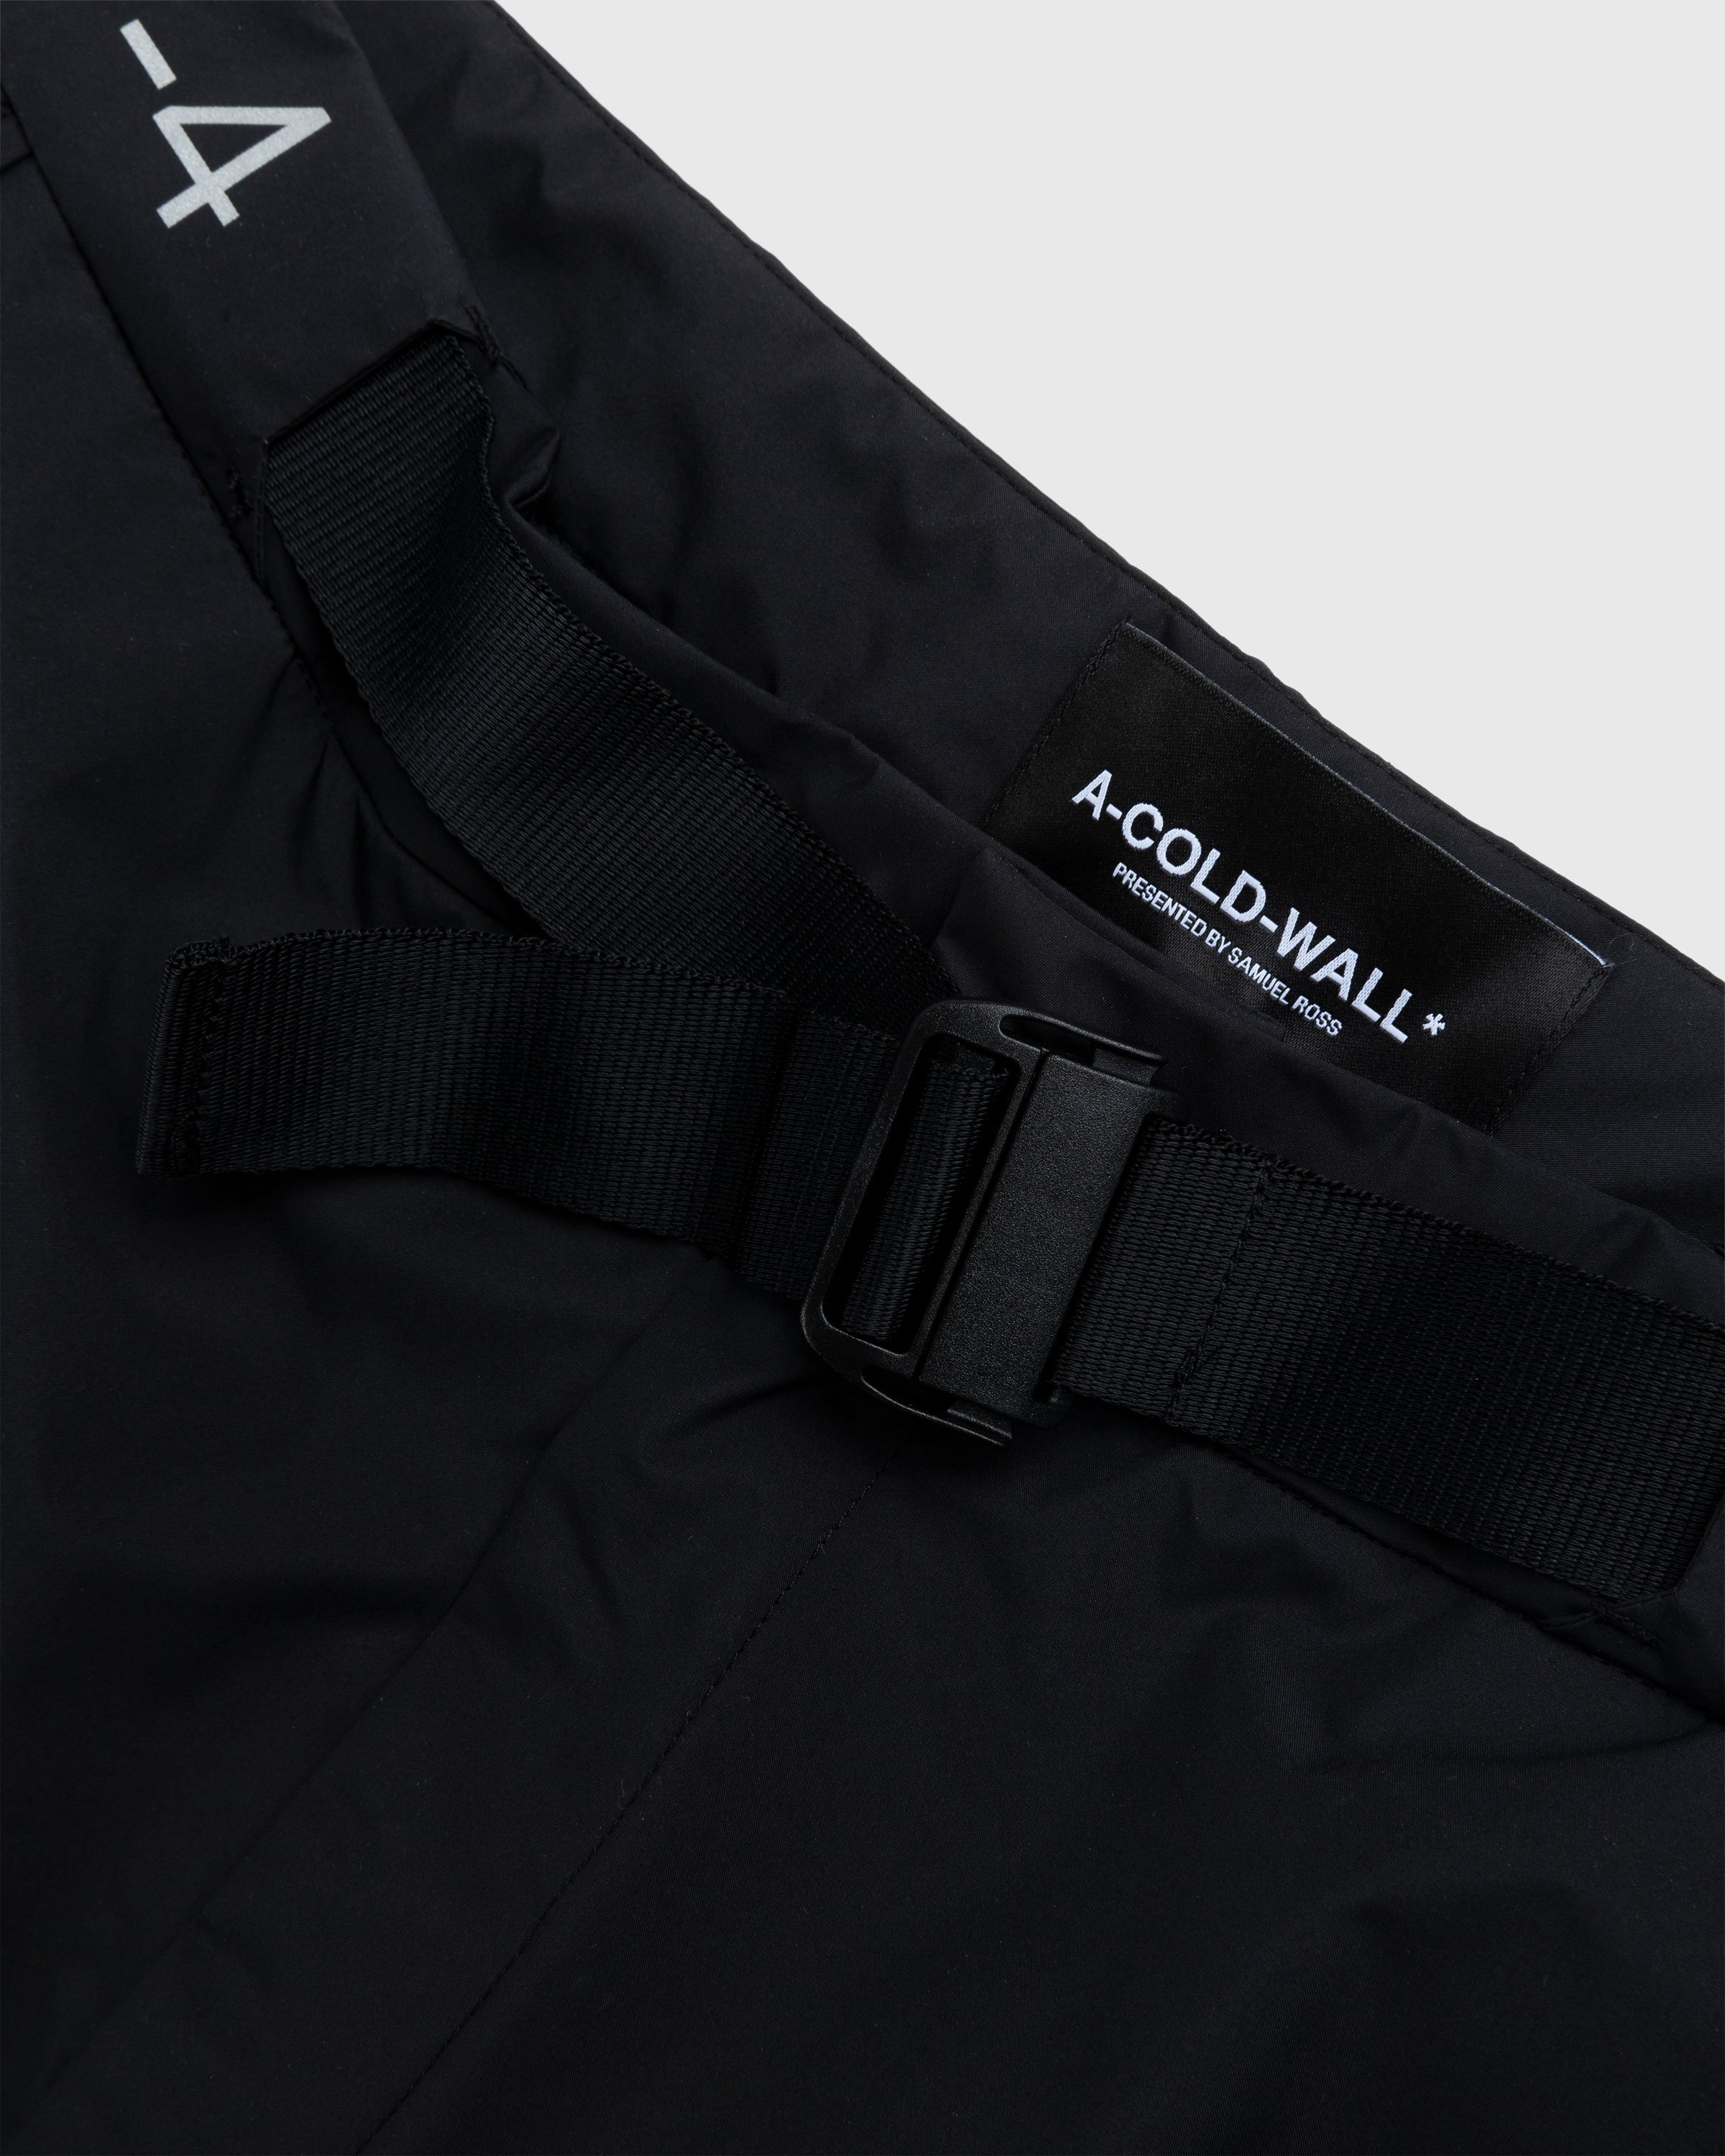 A-Cold-Wall* - Nephin Storm Pants Black - Clothing - Black - Image 6